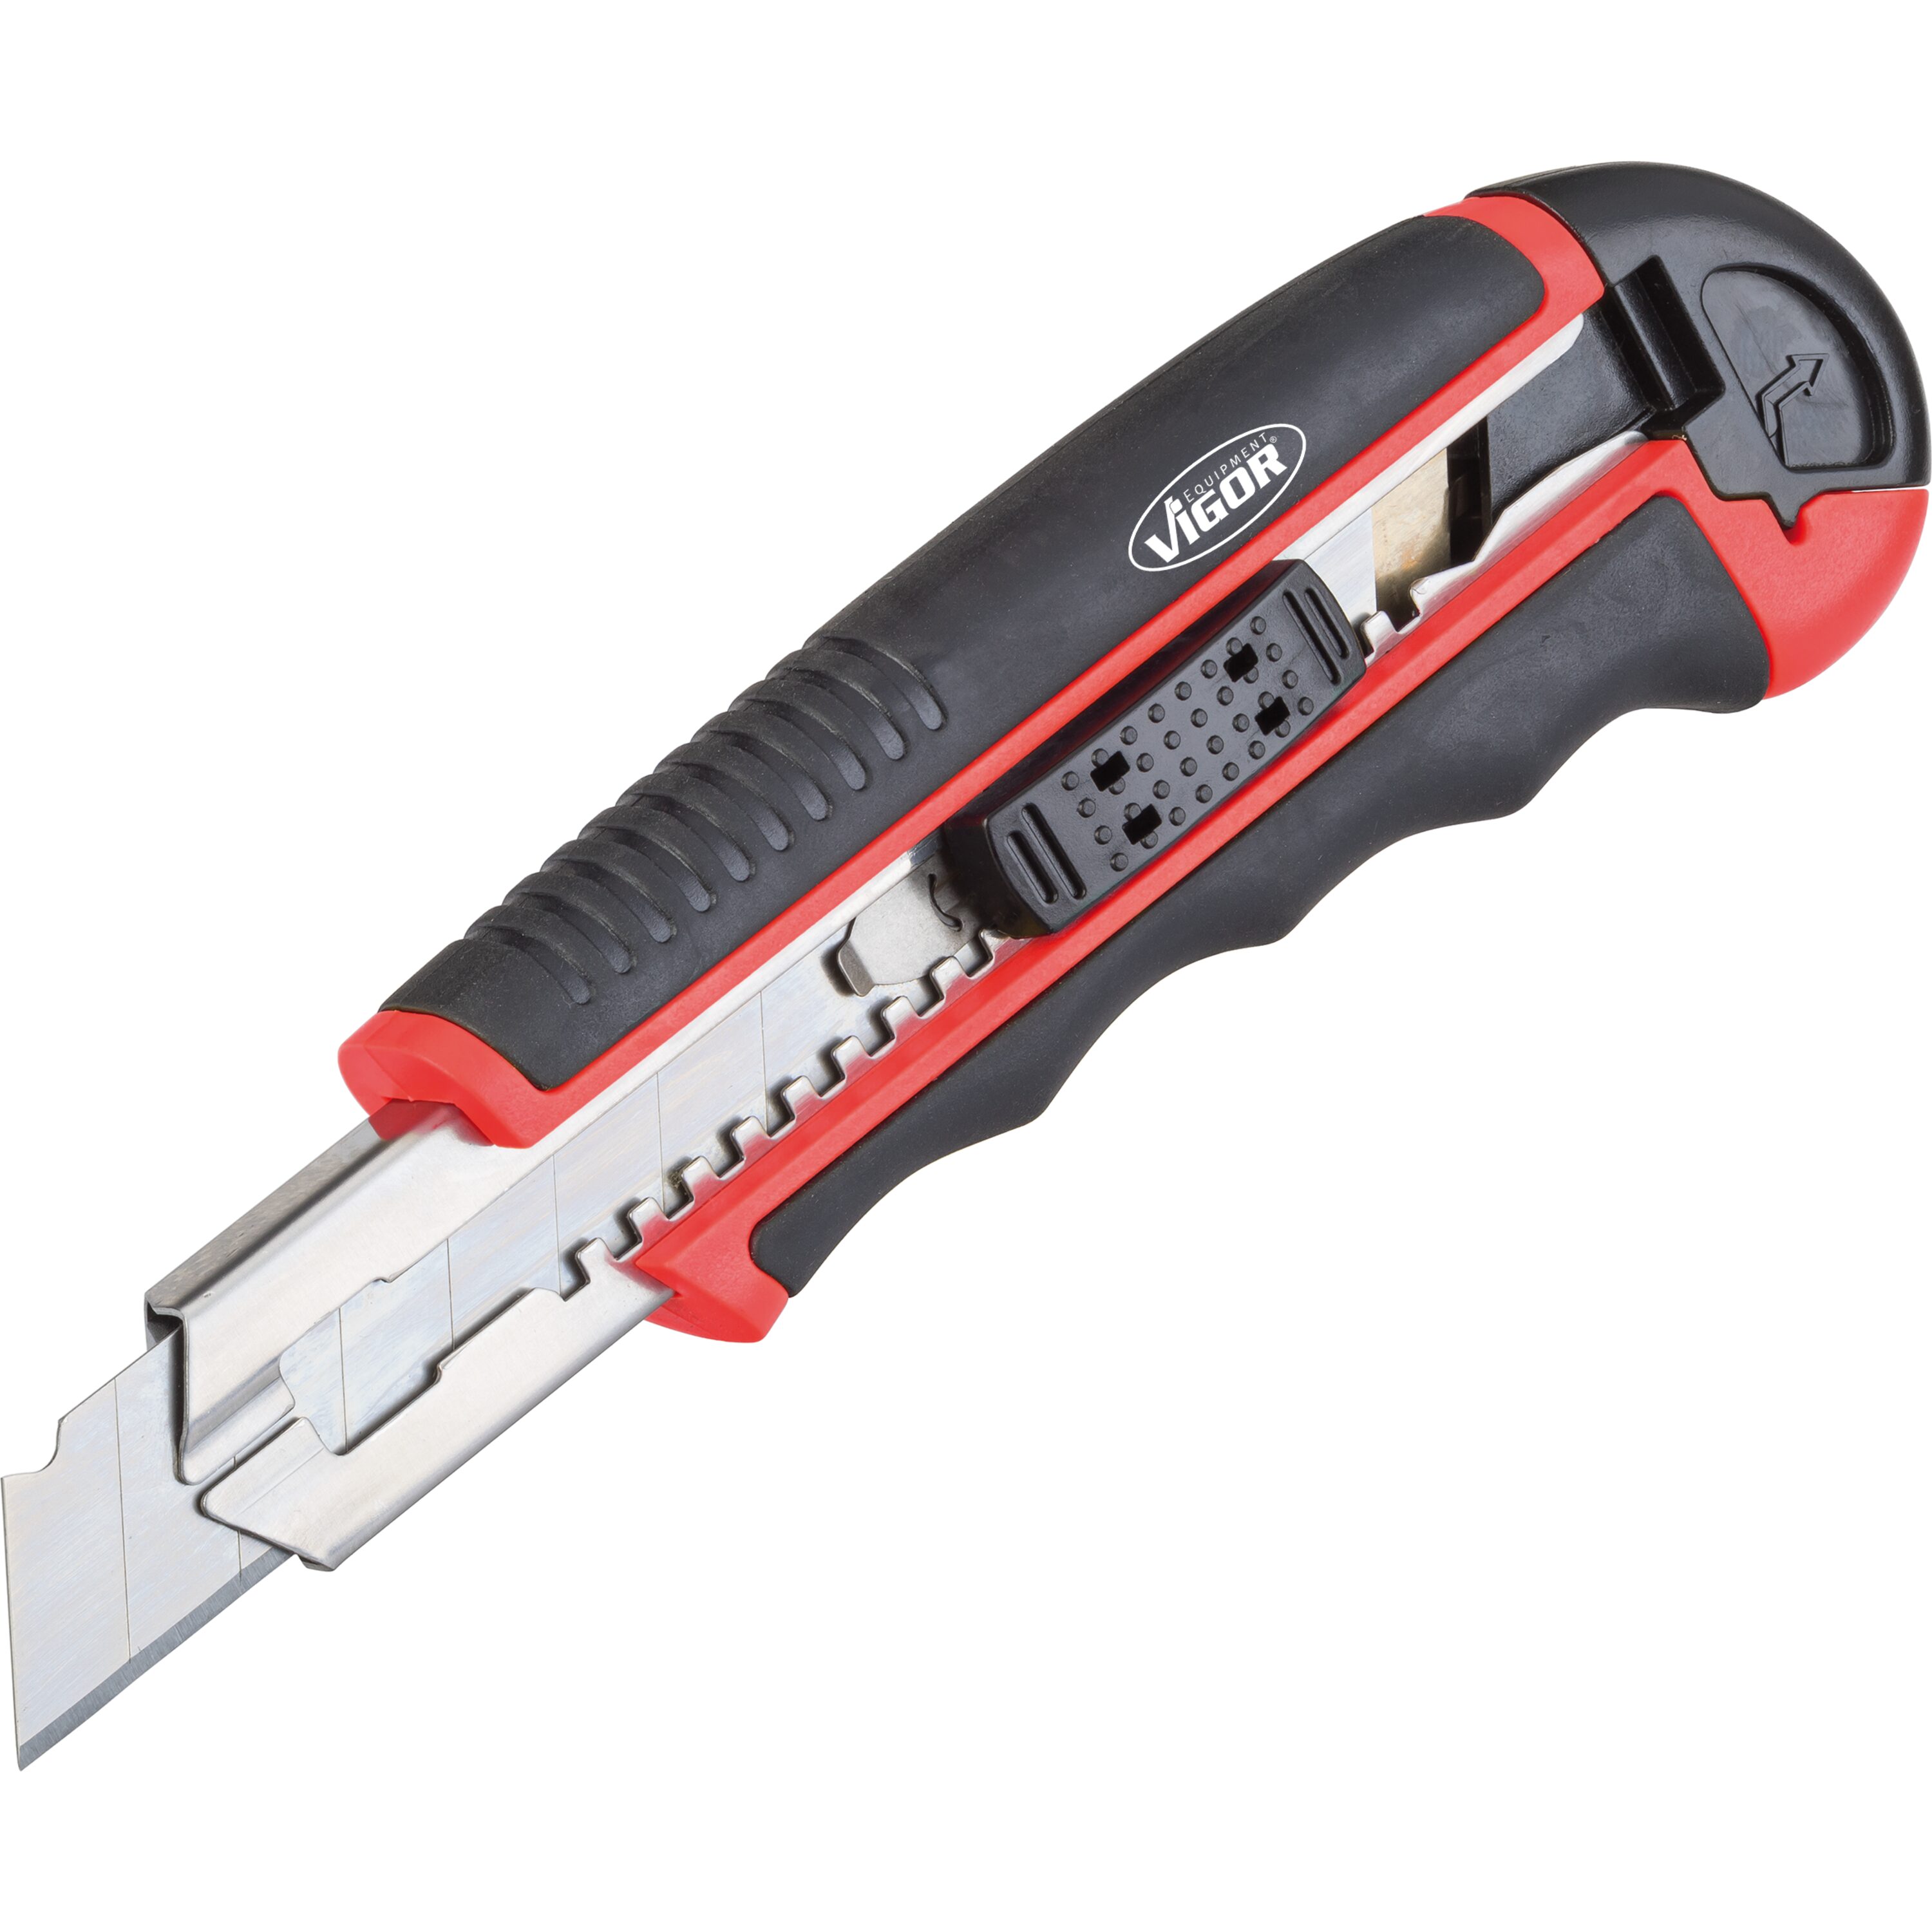 Universal knife, Schleifen / Trennen / Zerspanen, Cutting and sawing, Hand tools, product worlds